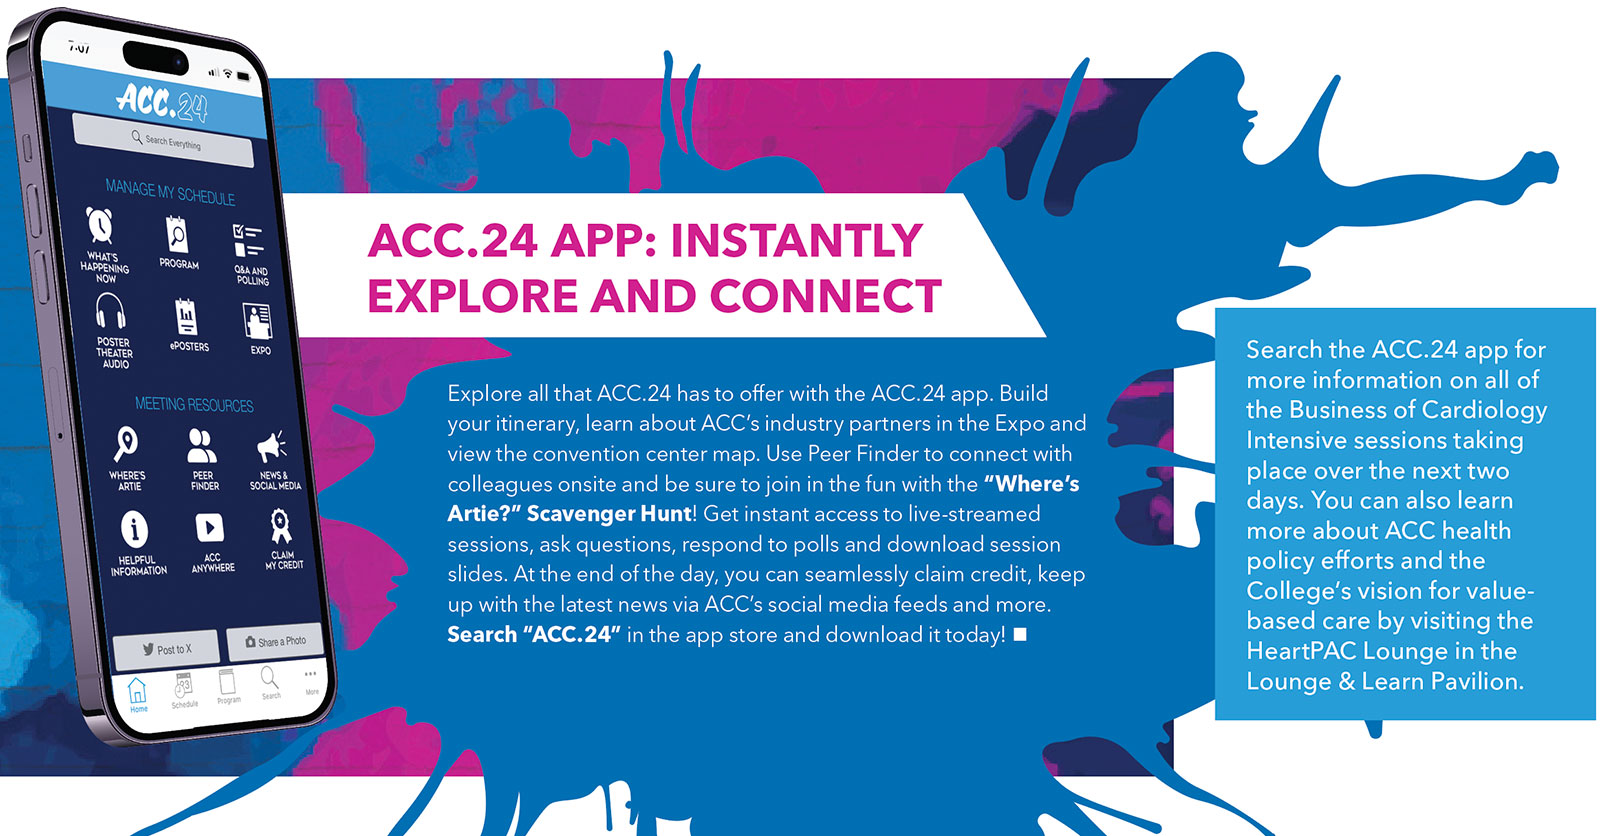 ACC.24 App: Instantly Explore and Connect